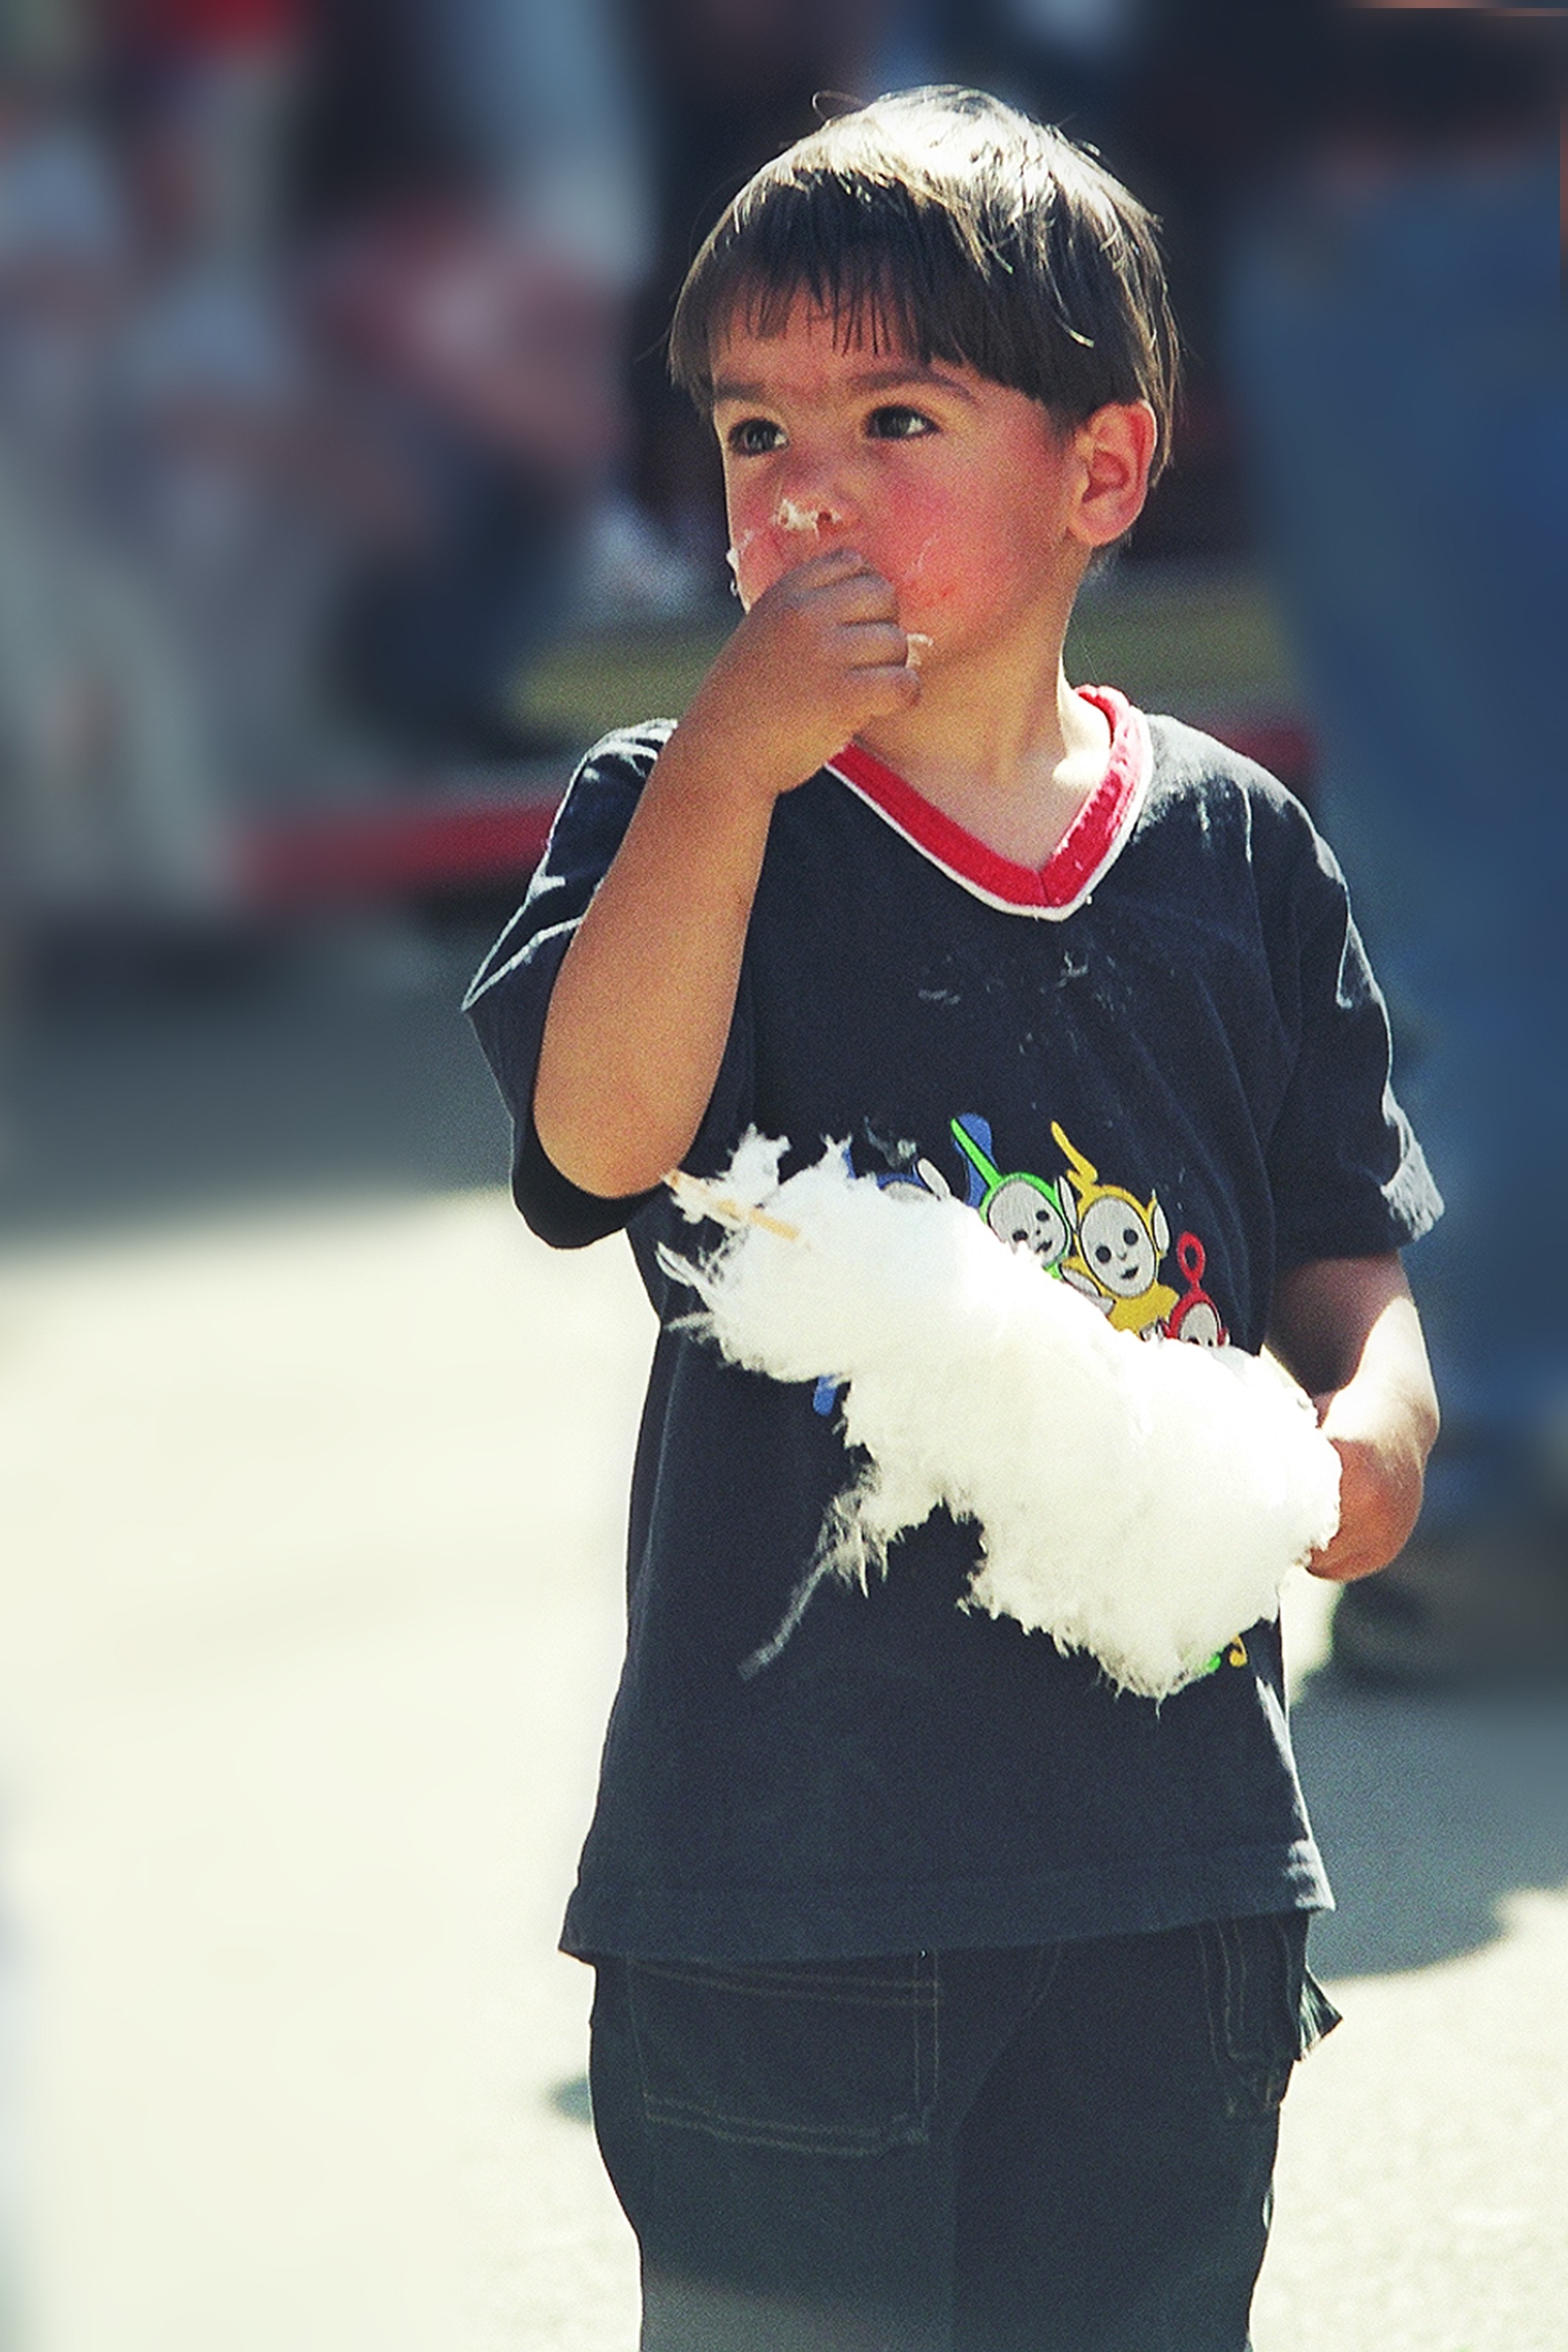 boy eating white cotton candy